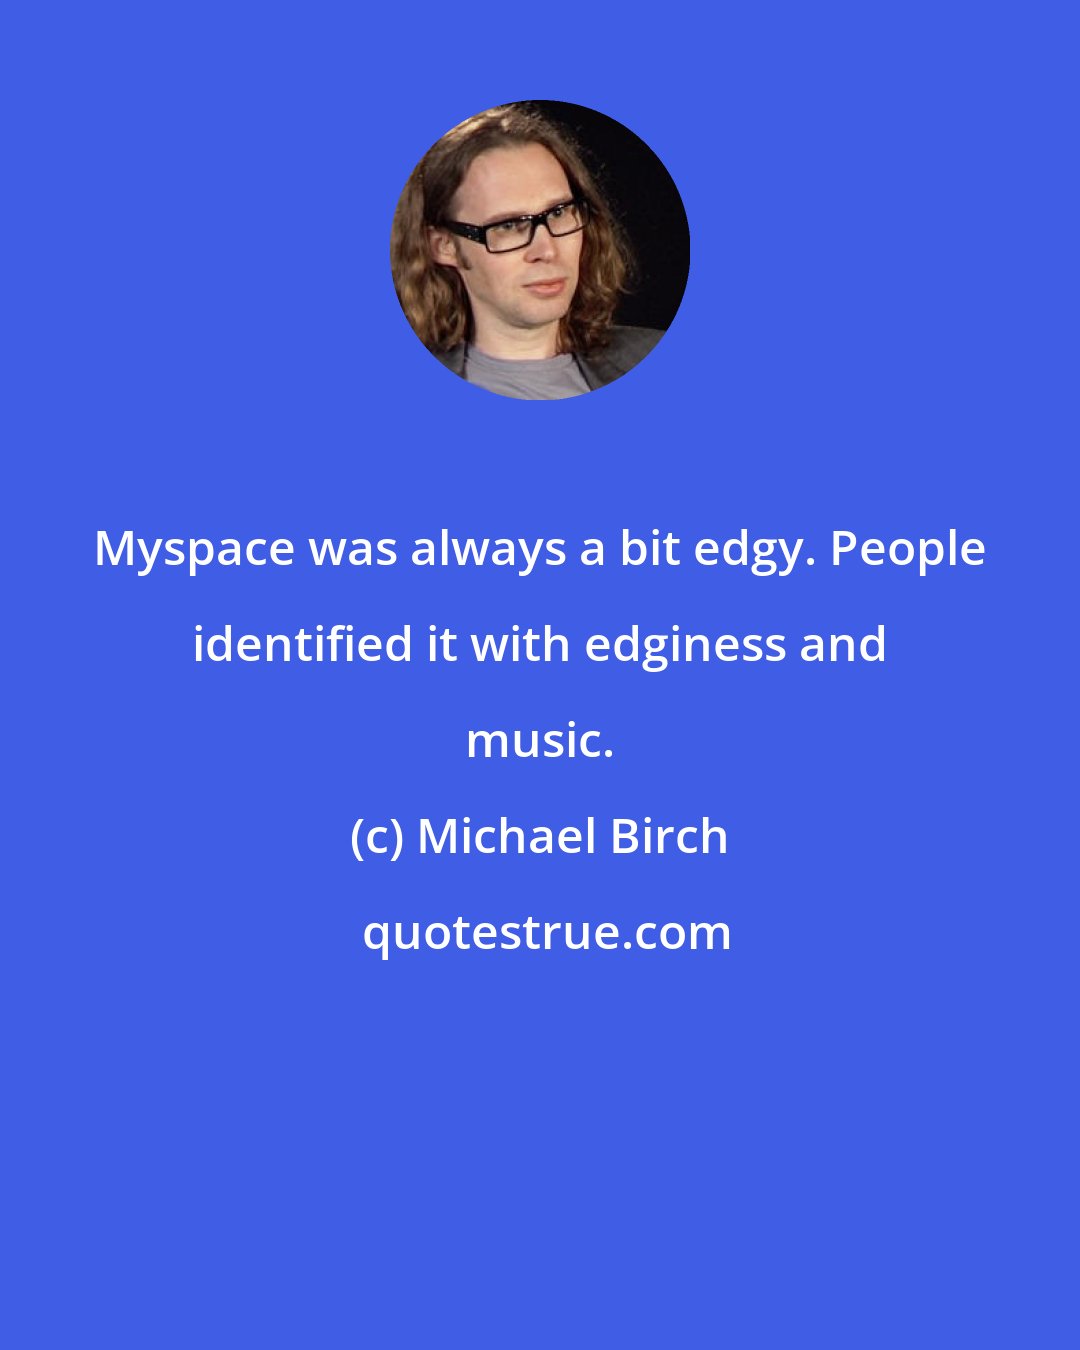 Michael Birch: Myspace was always a bit edgy. People identified it with edginess and music.